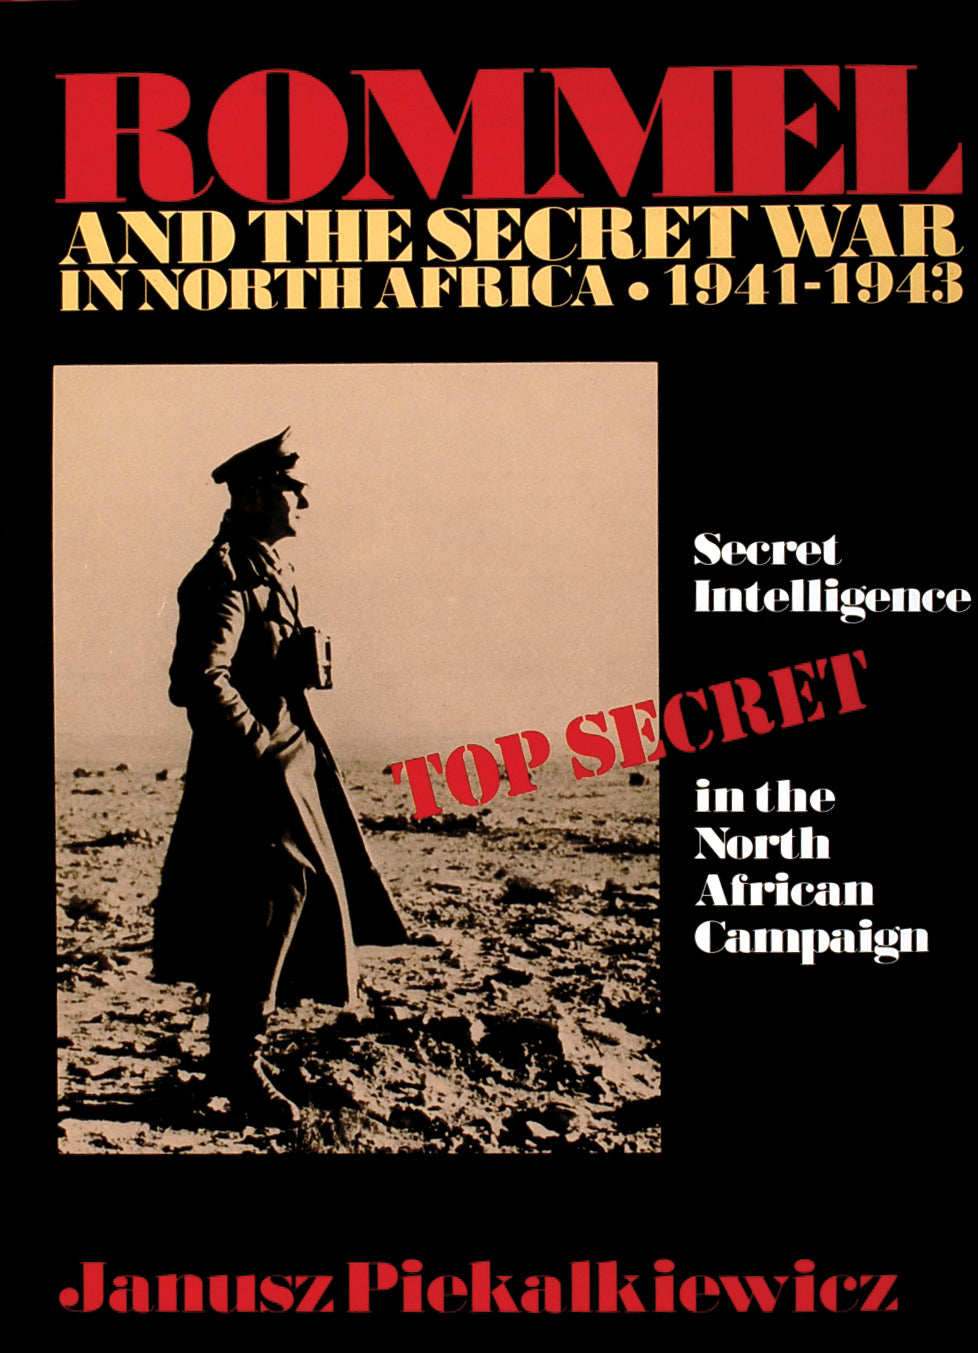 Rommel and the Secret War in North Africa